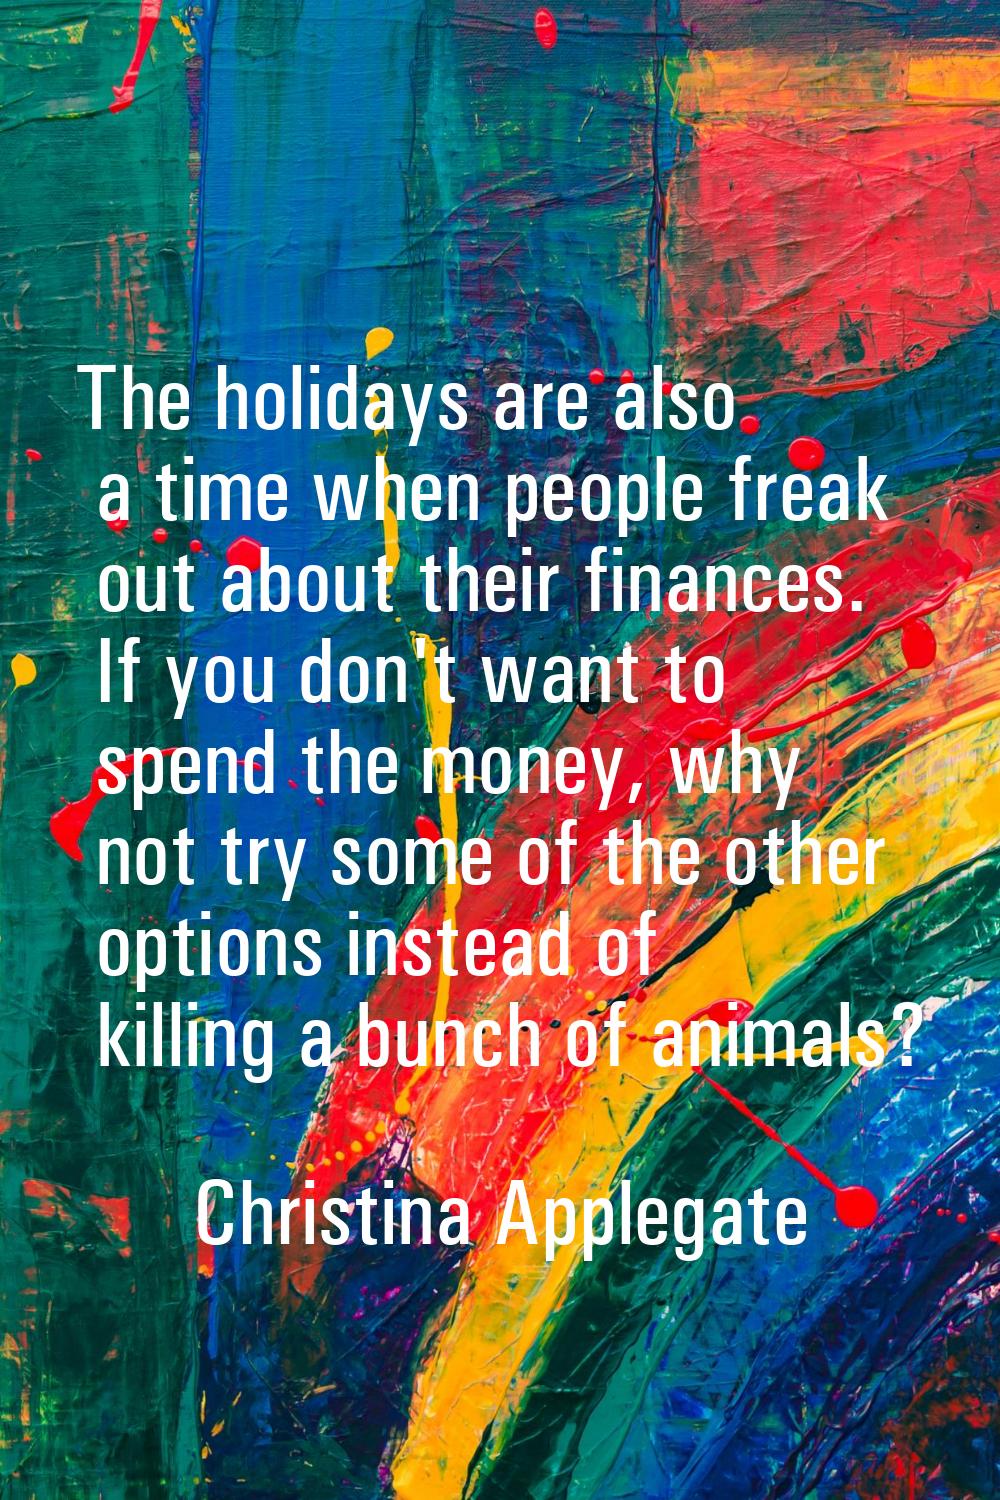 The holidays are also a time when people freak out about their finances. If you don't want to spend